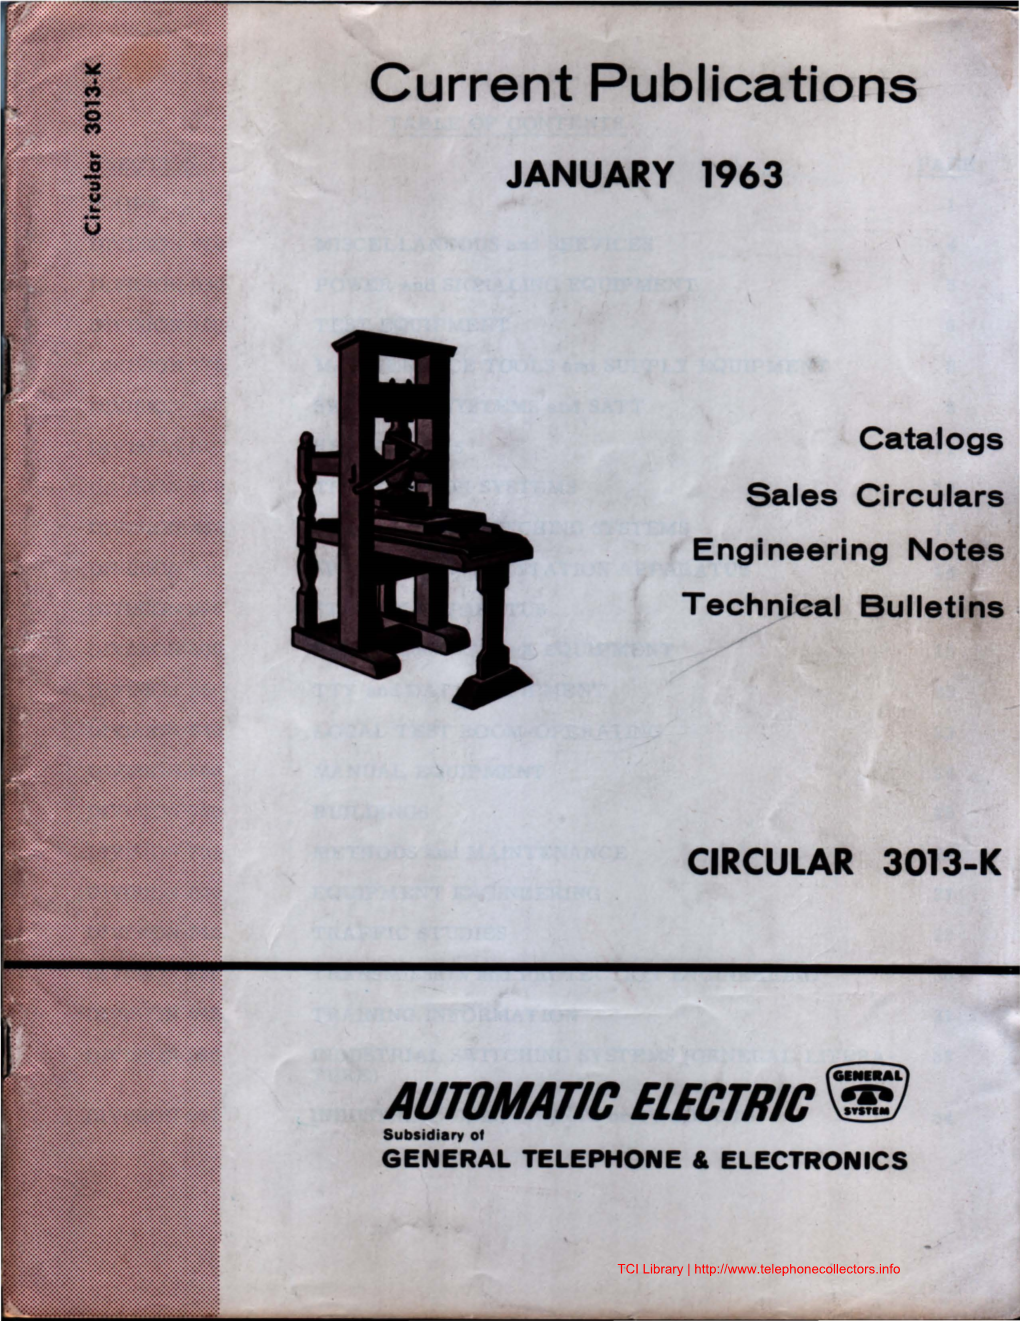 Current Publications January 1963